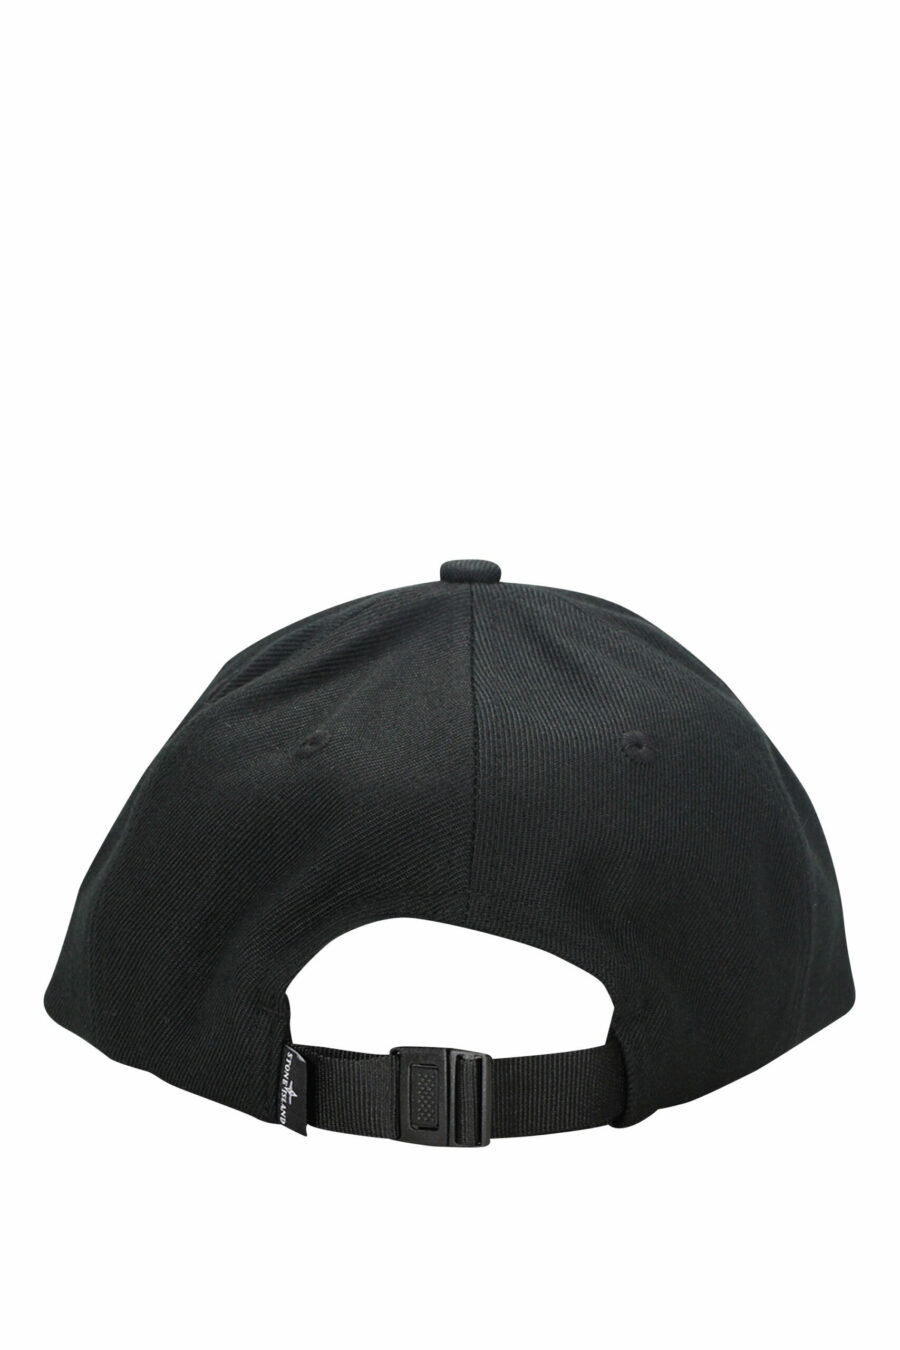 Black cap with embossed embroidered logo - 8052572734557 1 scaled